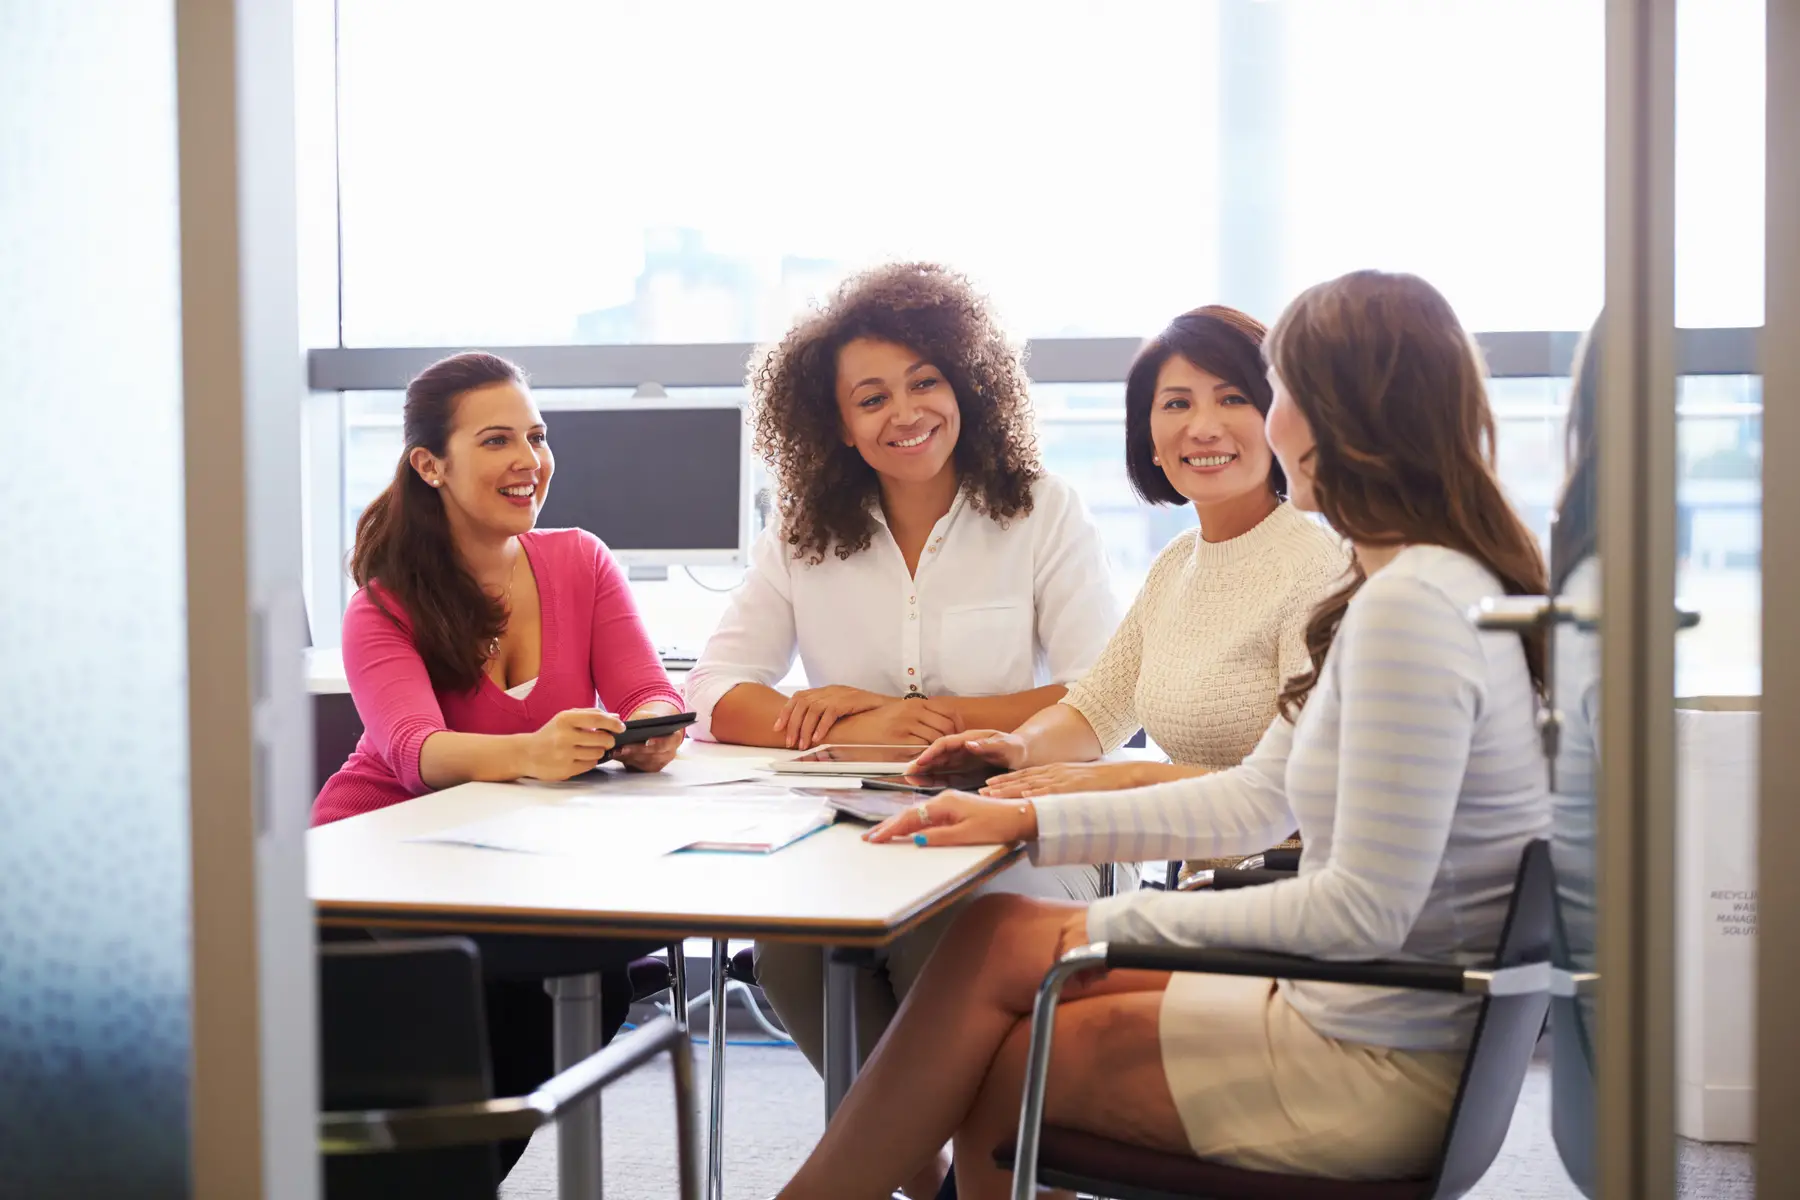 A group of women at a work meeting